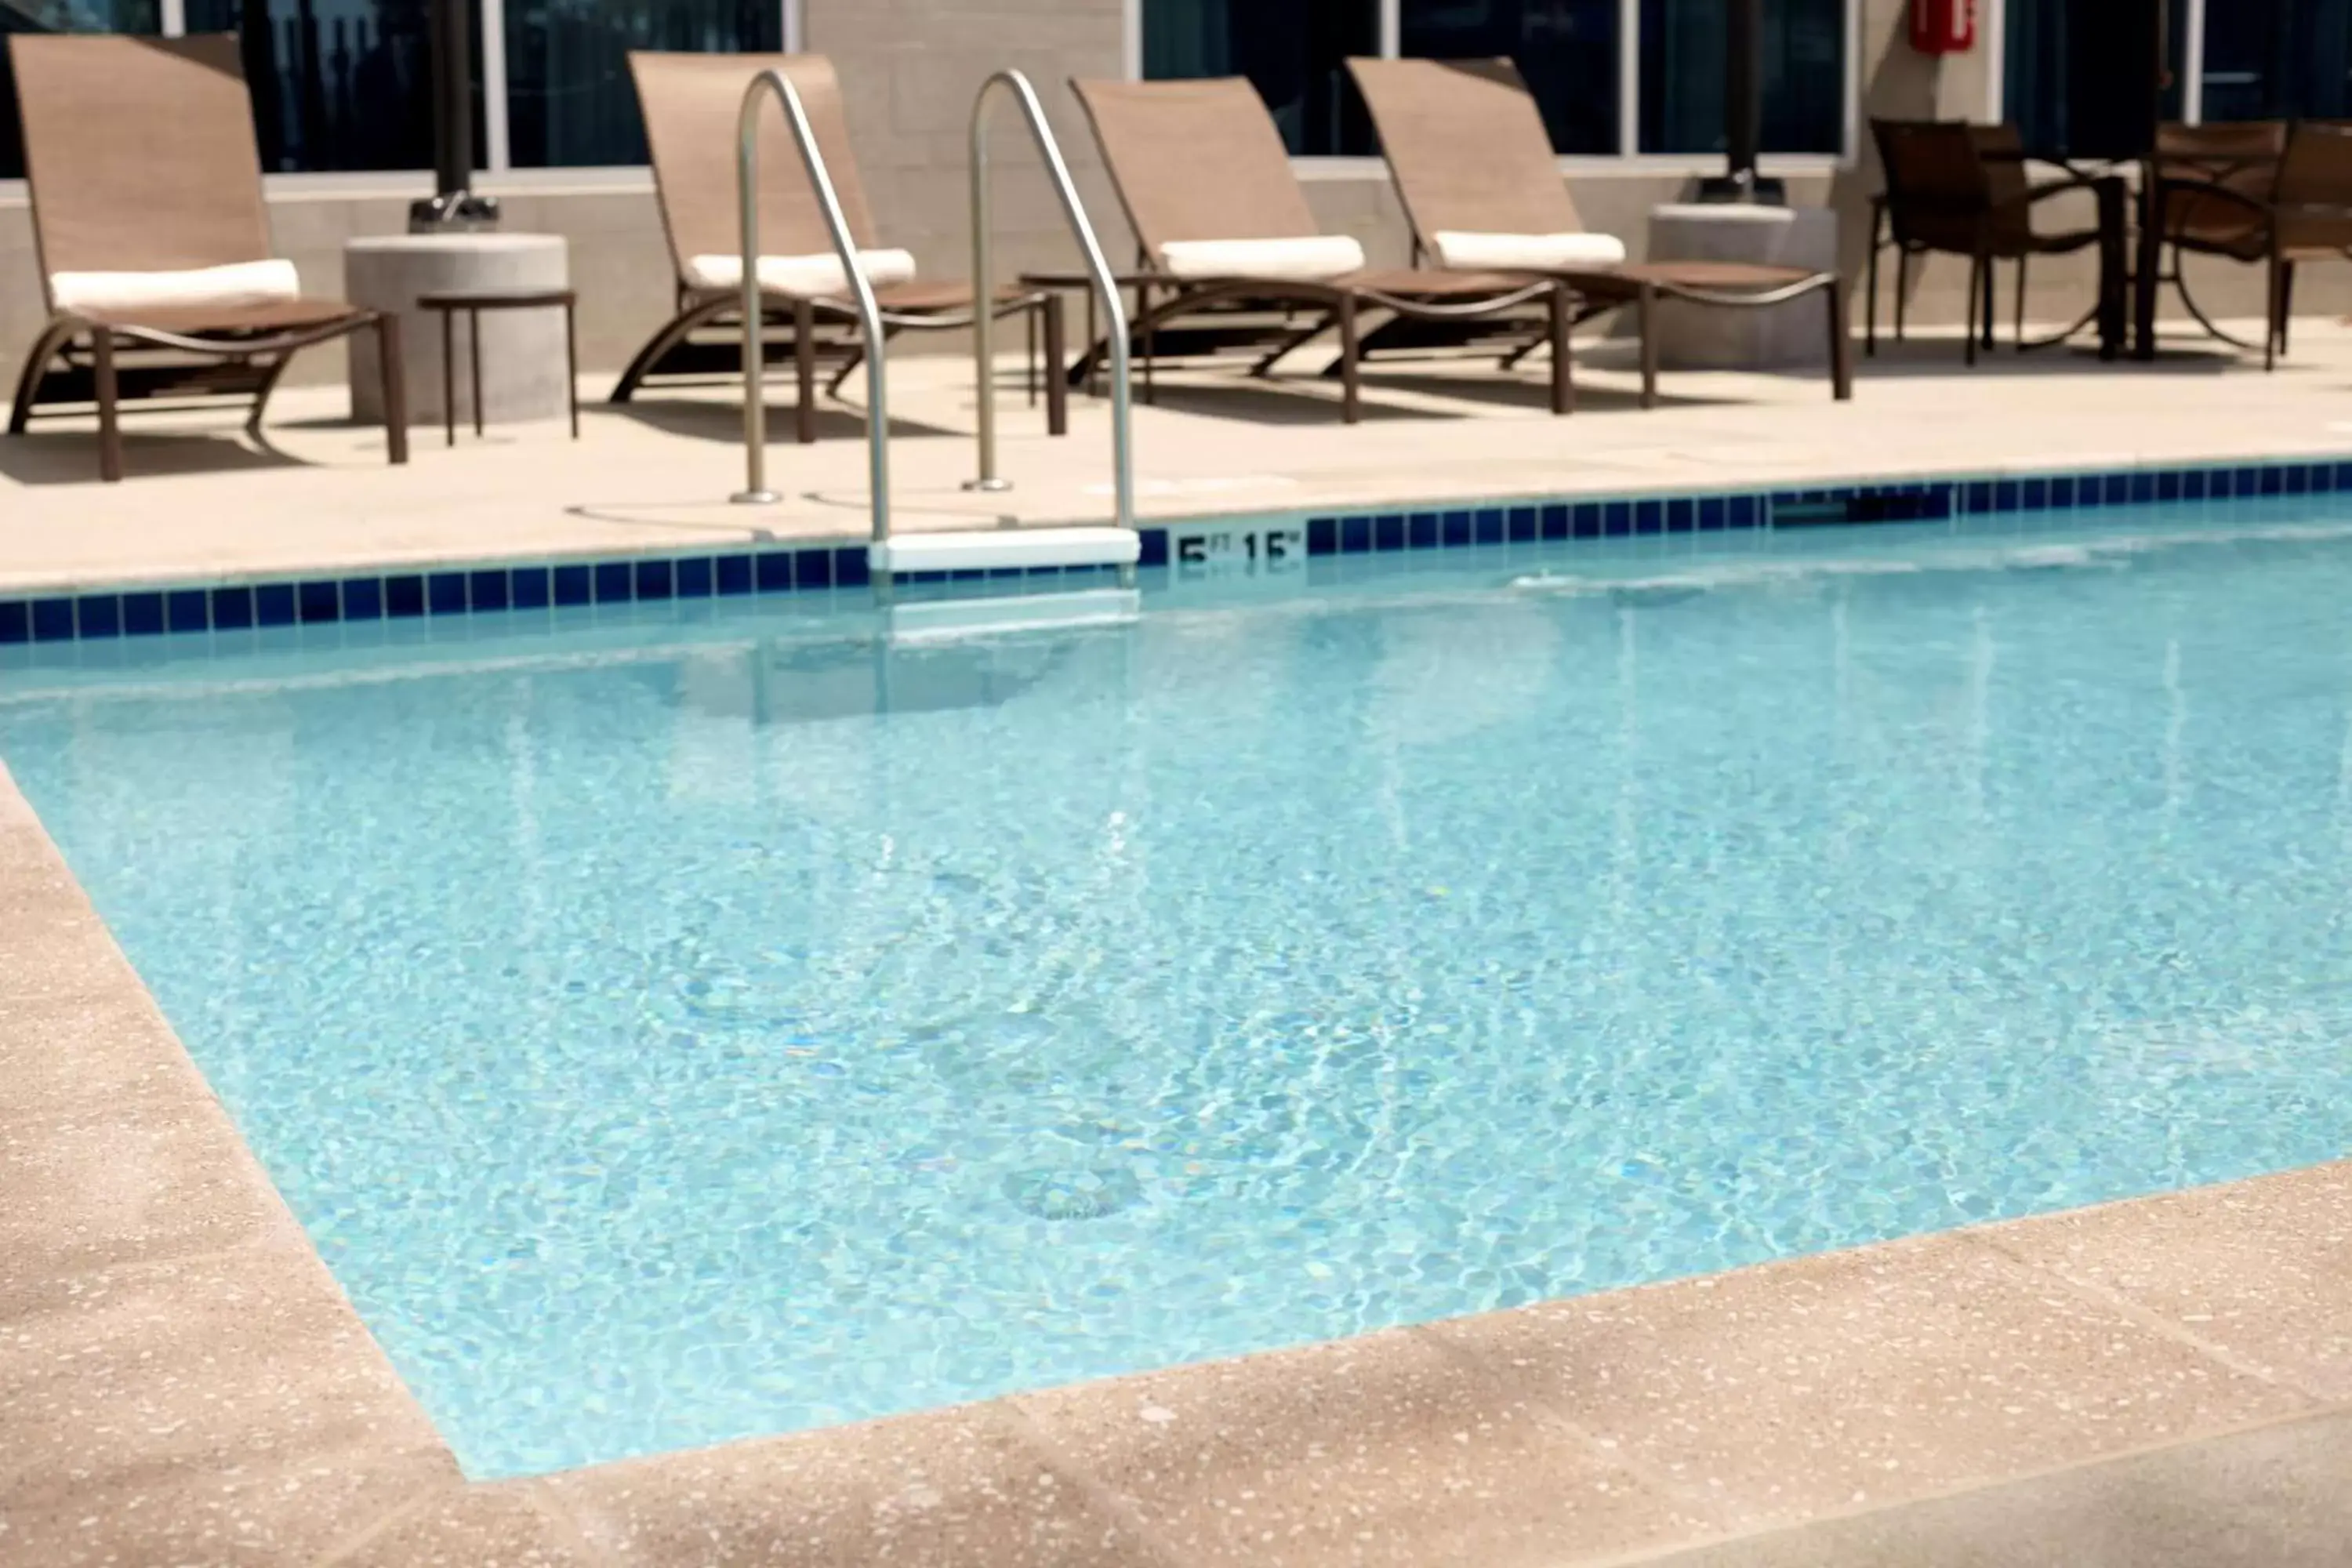 On site, Swimming Pool in Hyatt Place Melbourne/Palm Bay